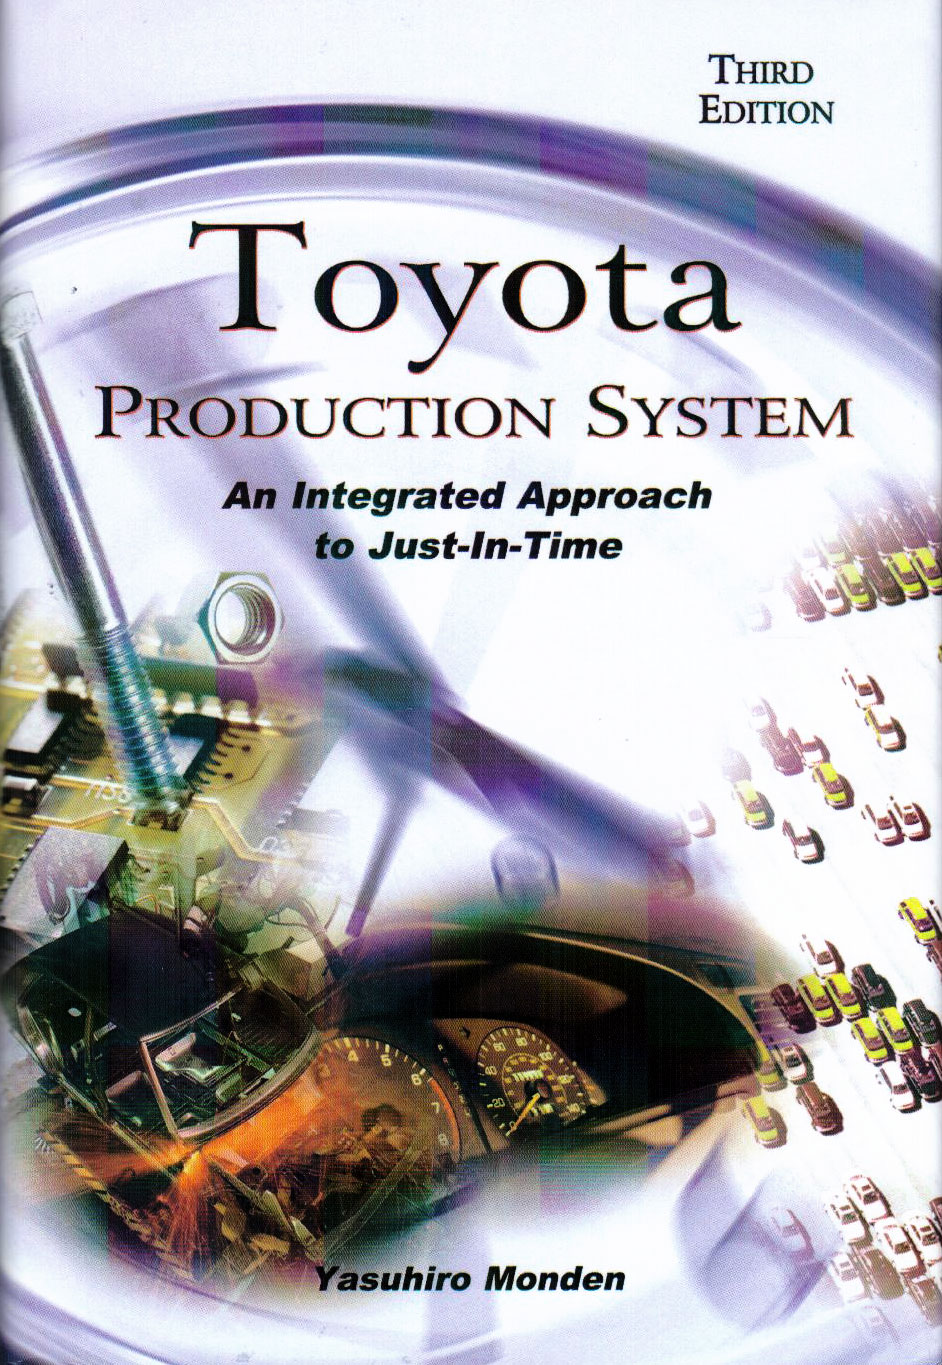 toyota production system an integrated approach to just in time #7